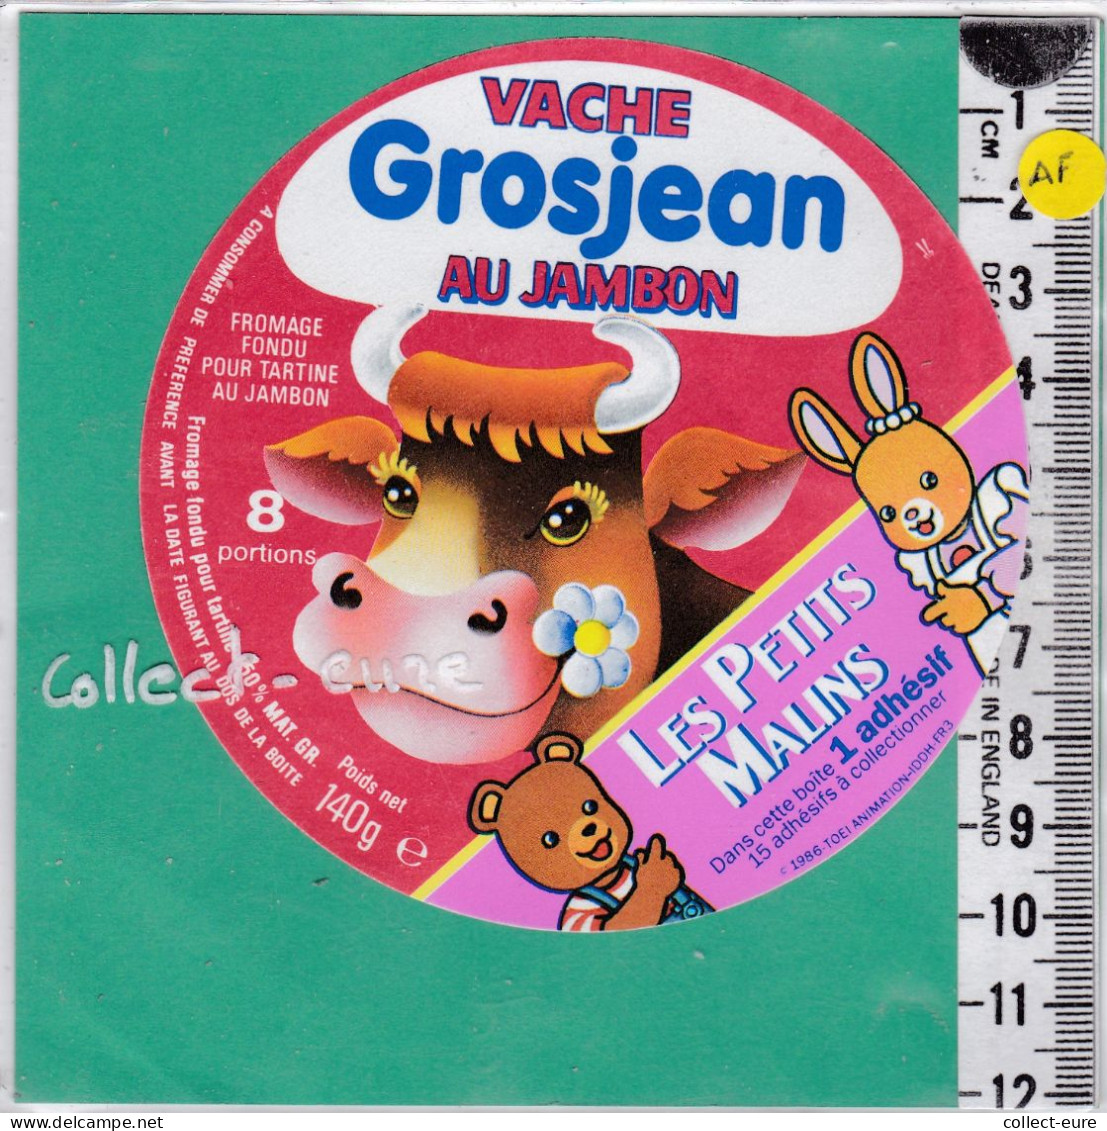 C1293 FROMAGE FONDU VACHE GROJEAN 8 PORTIONS AU JAMBON LES PETITS MALINS LAPIN OURS 1986 140 Gr - Fromage